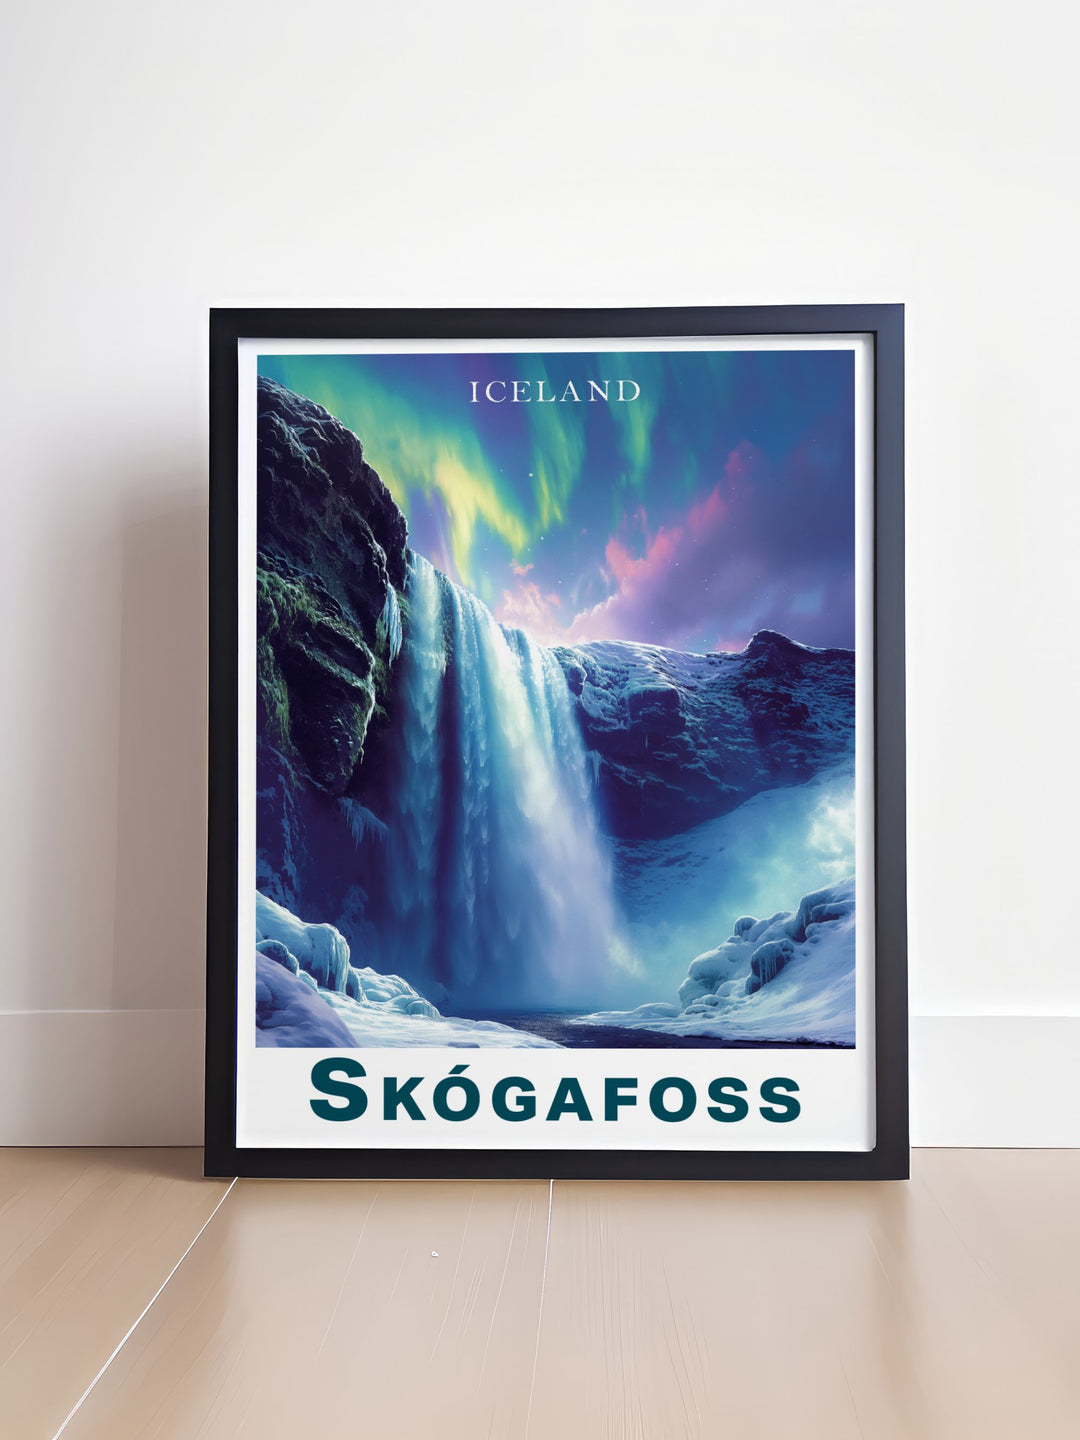 Skogafoss waterfall northern lights vintage print displaying the enchanting scene of the waterfall and aurora borealis perfect for adding a nostalgic touch to any room